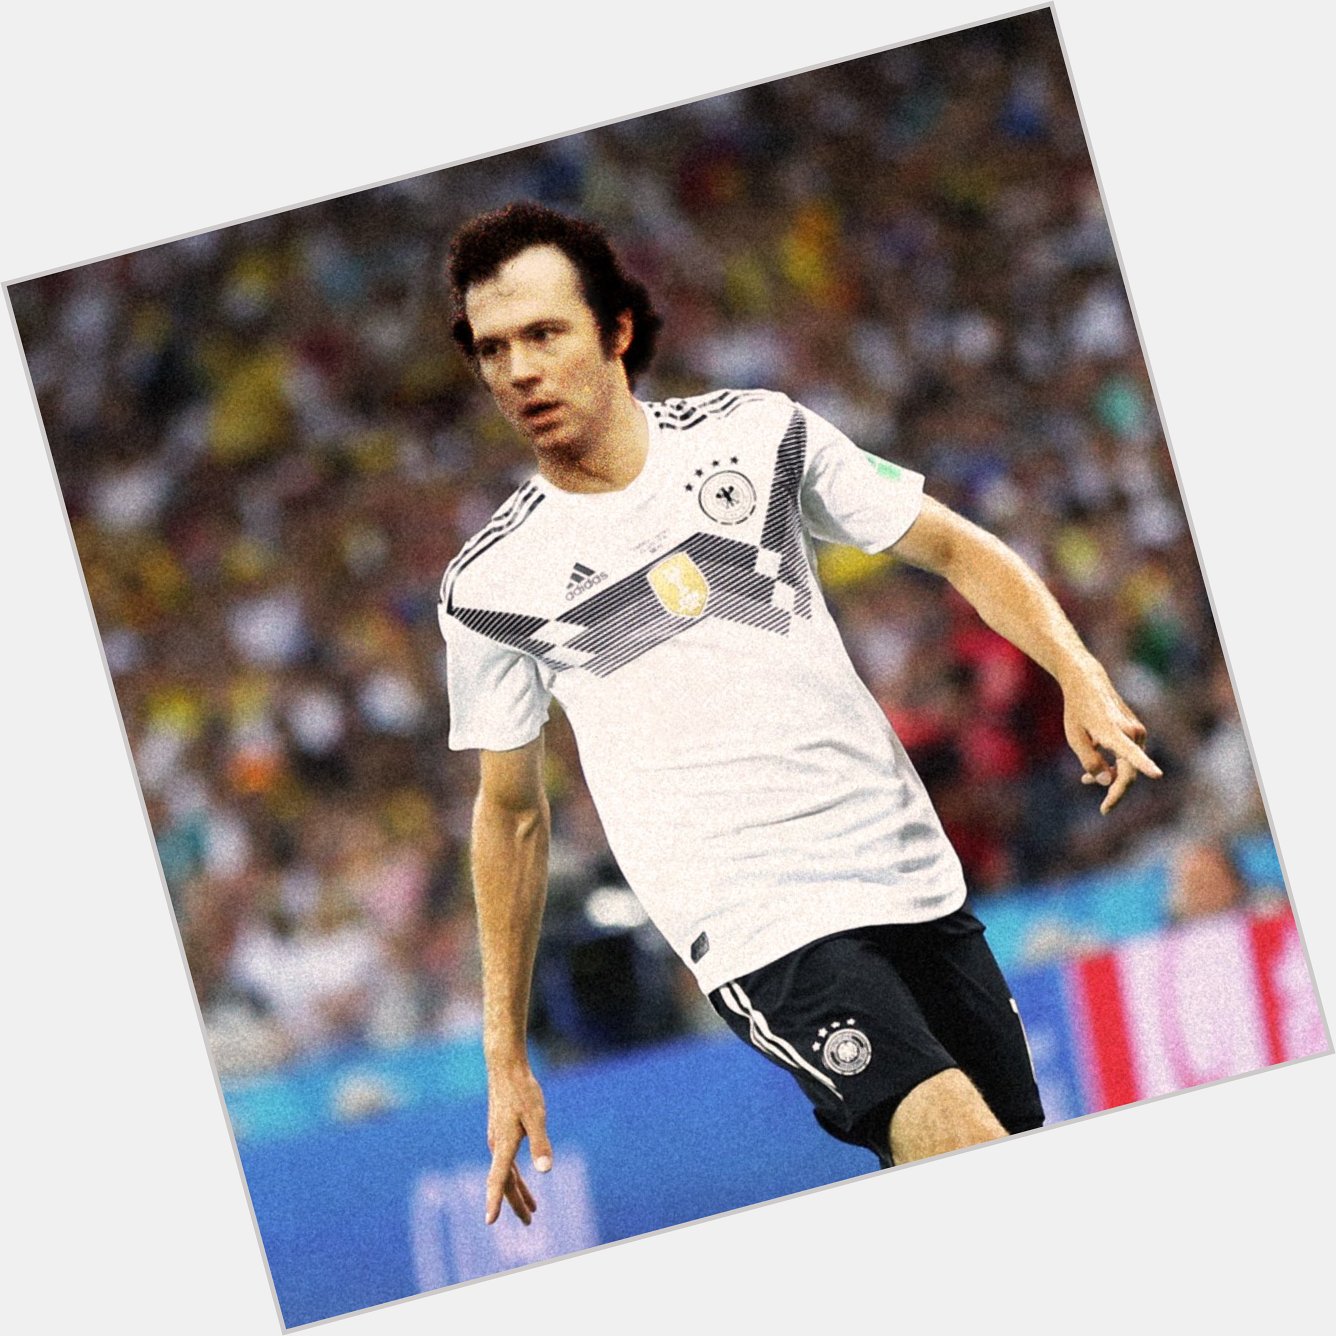 And of course, happy birthday to the absolute don that is Franz Beckenbauer. 